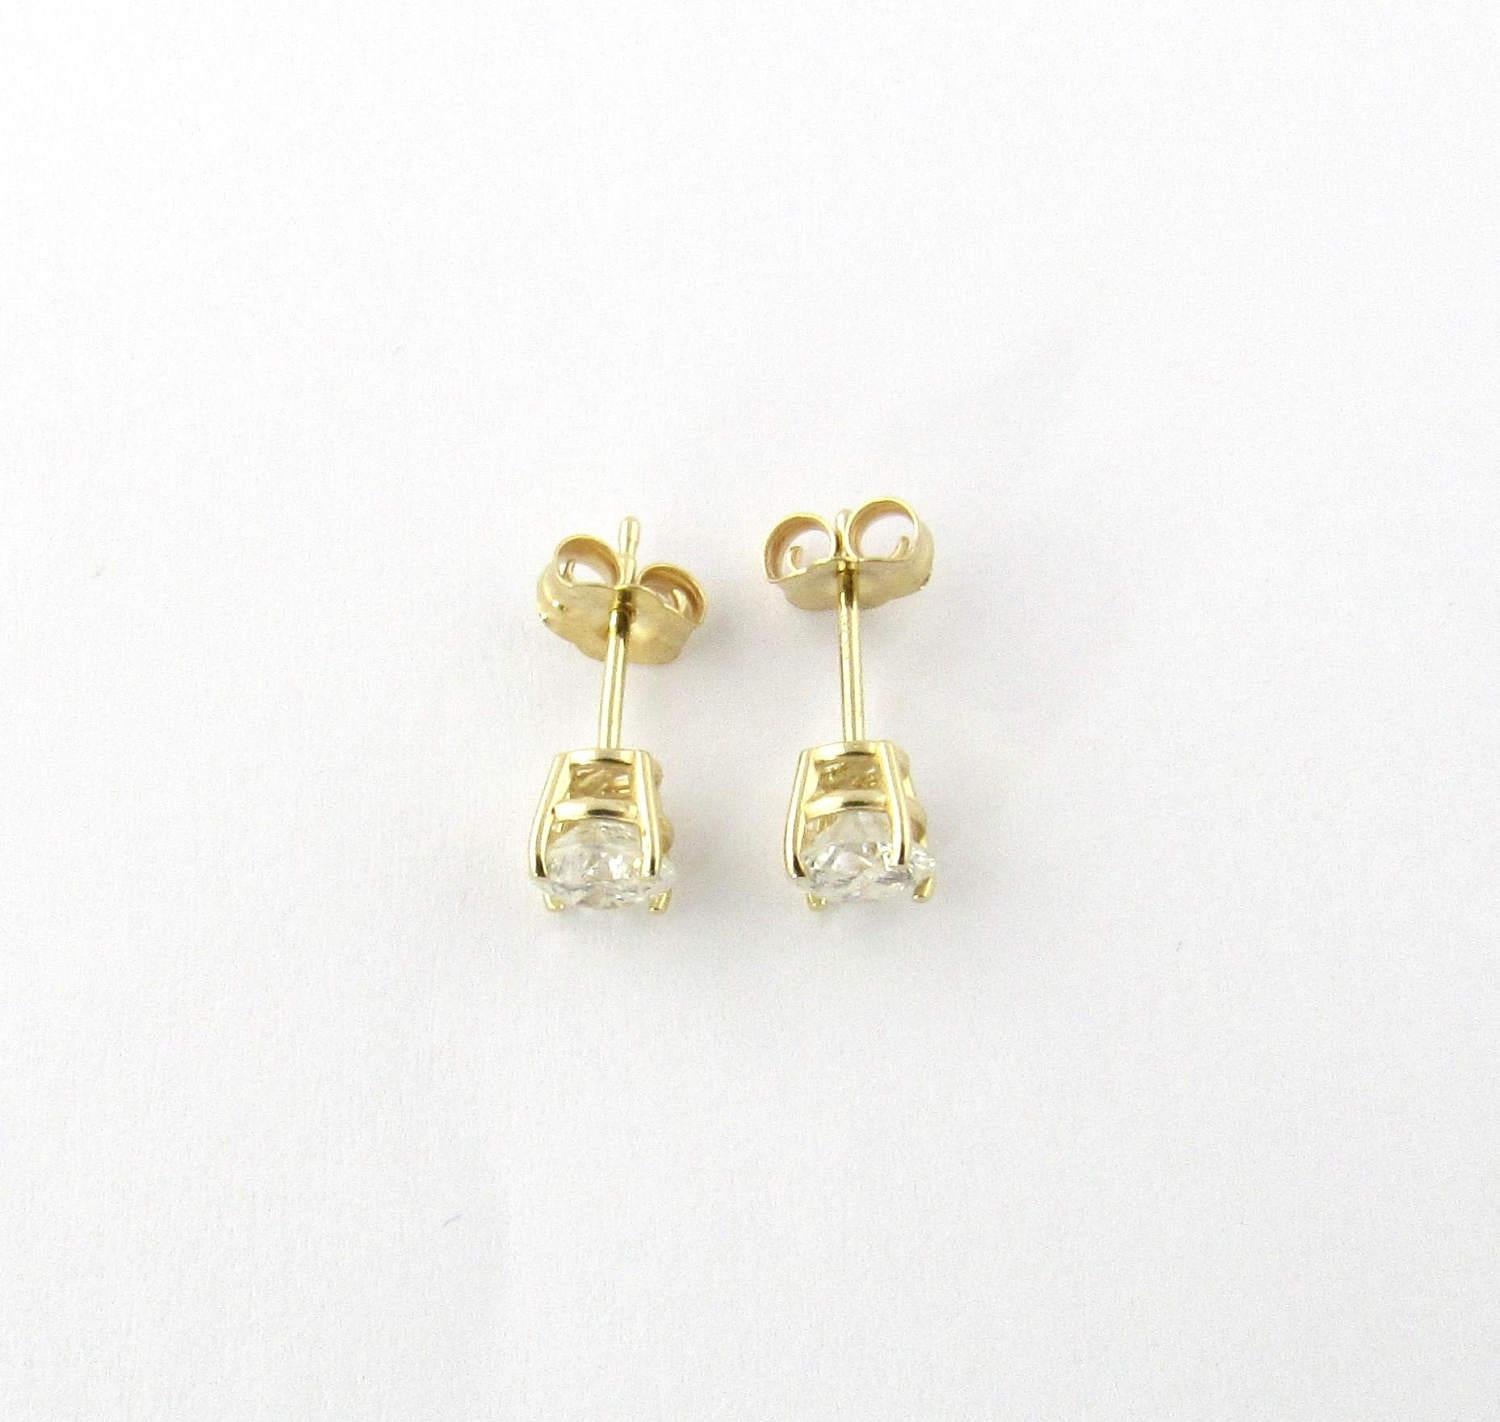 Vintage 14K Yellow gold diamond stud earrings. Round brilliant diamonds approx. .40ct each. 
Approx. twt .80ct. J-K color. I2 clarity.   Yellow wire base settings with push on backs. 14mm long. 6mm wide at prongs.Posts marked: 14K ZEI Backs marked: